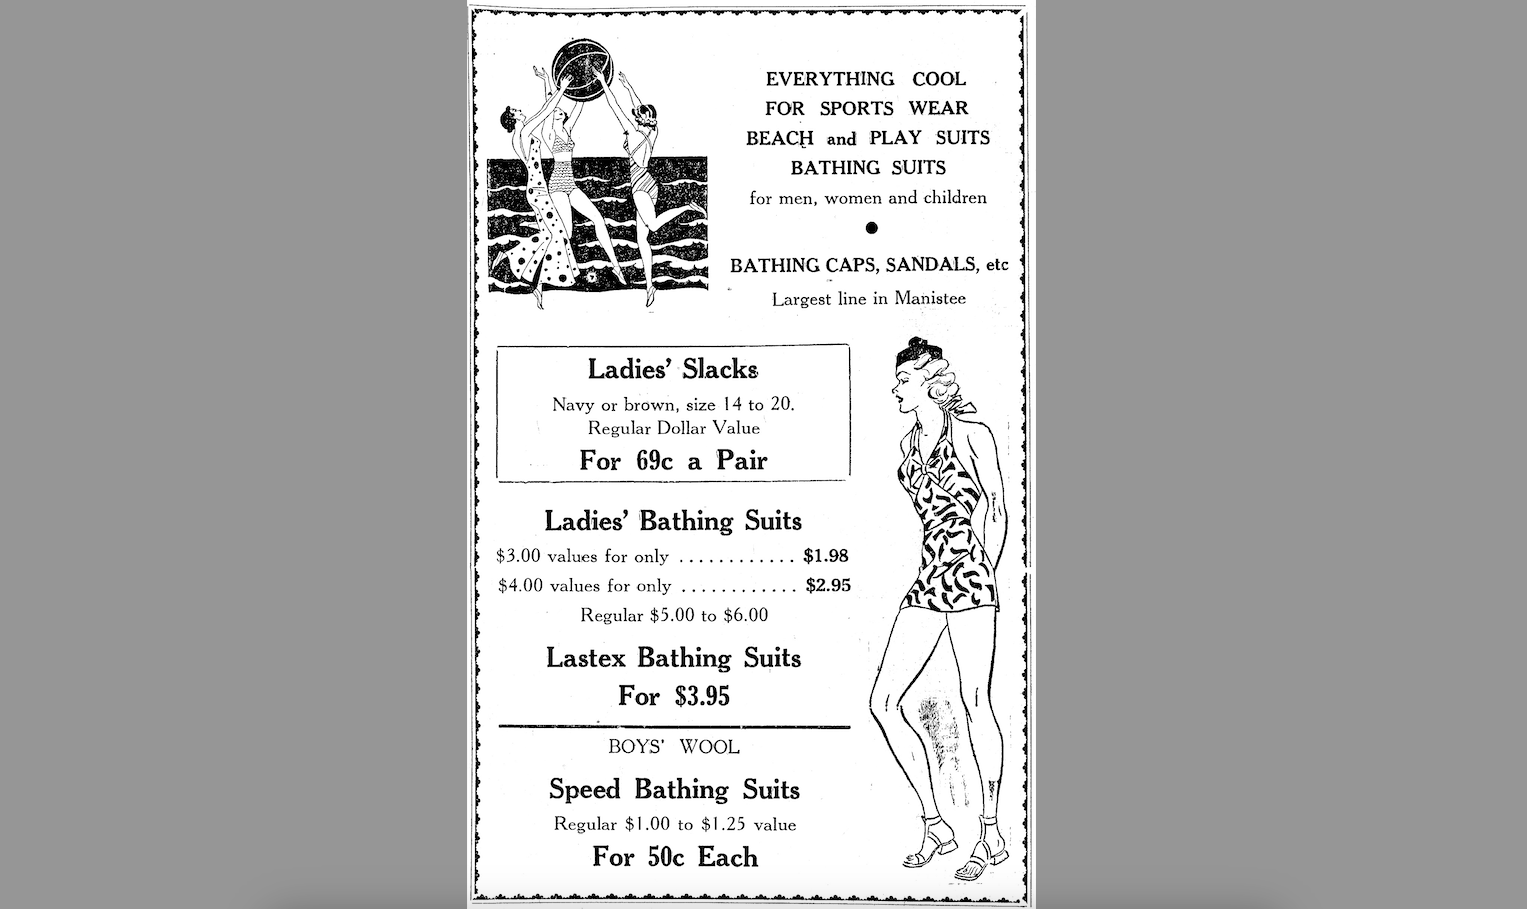 Manistee columnist takes issue with 1937 womens clothing choices